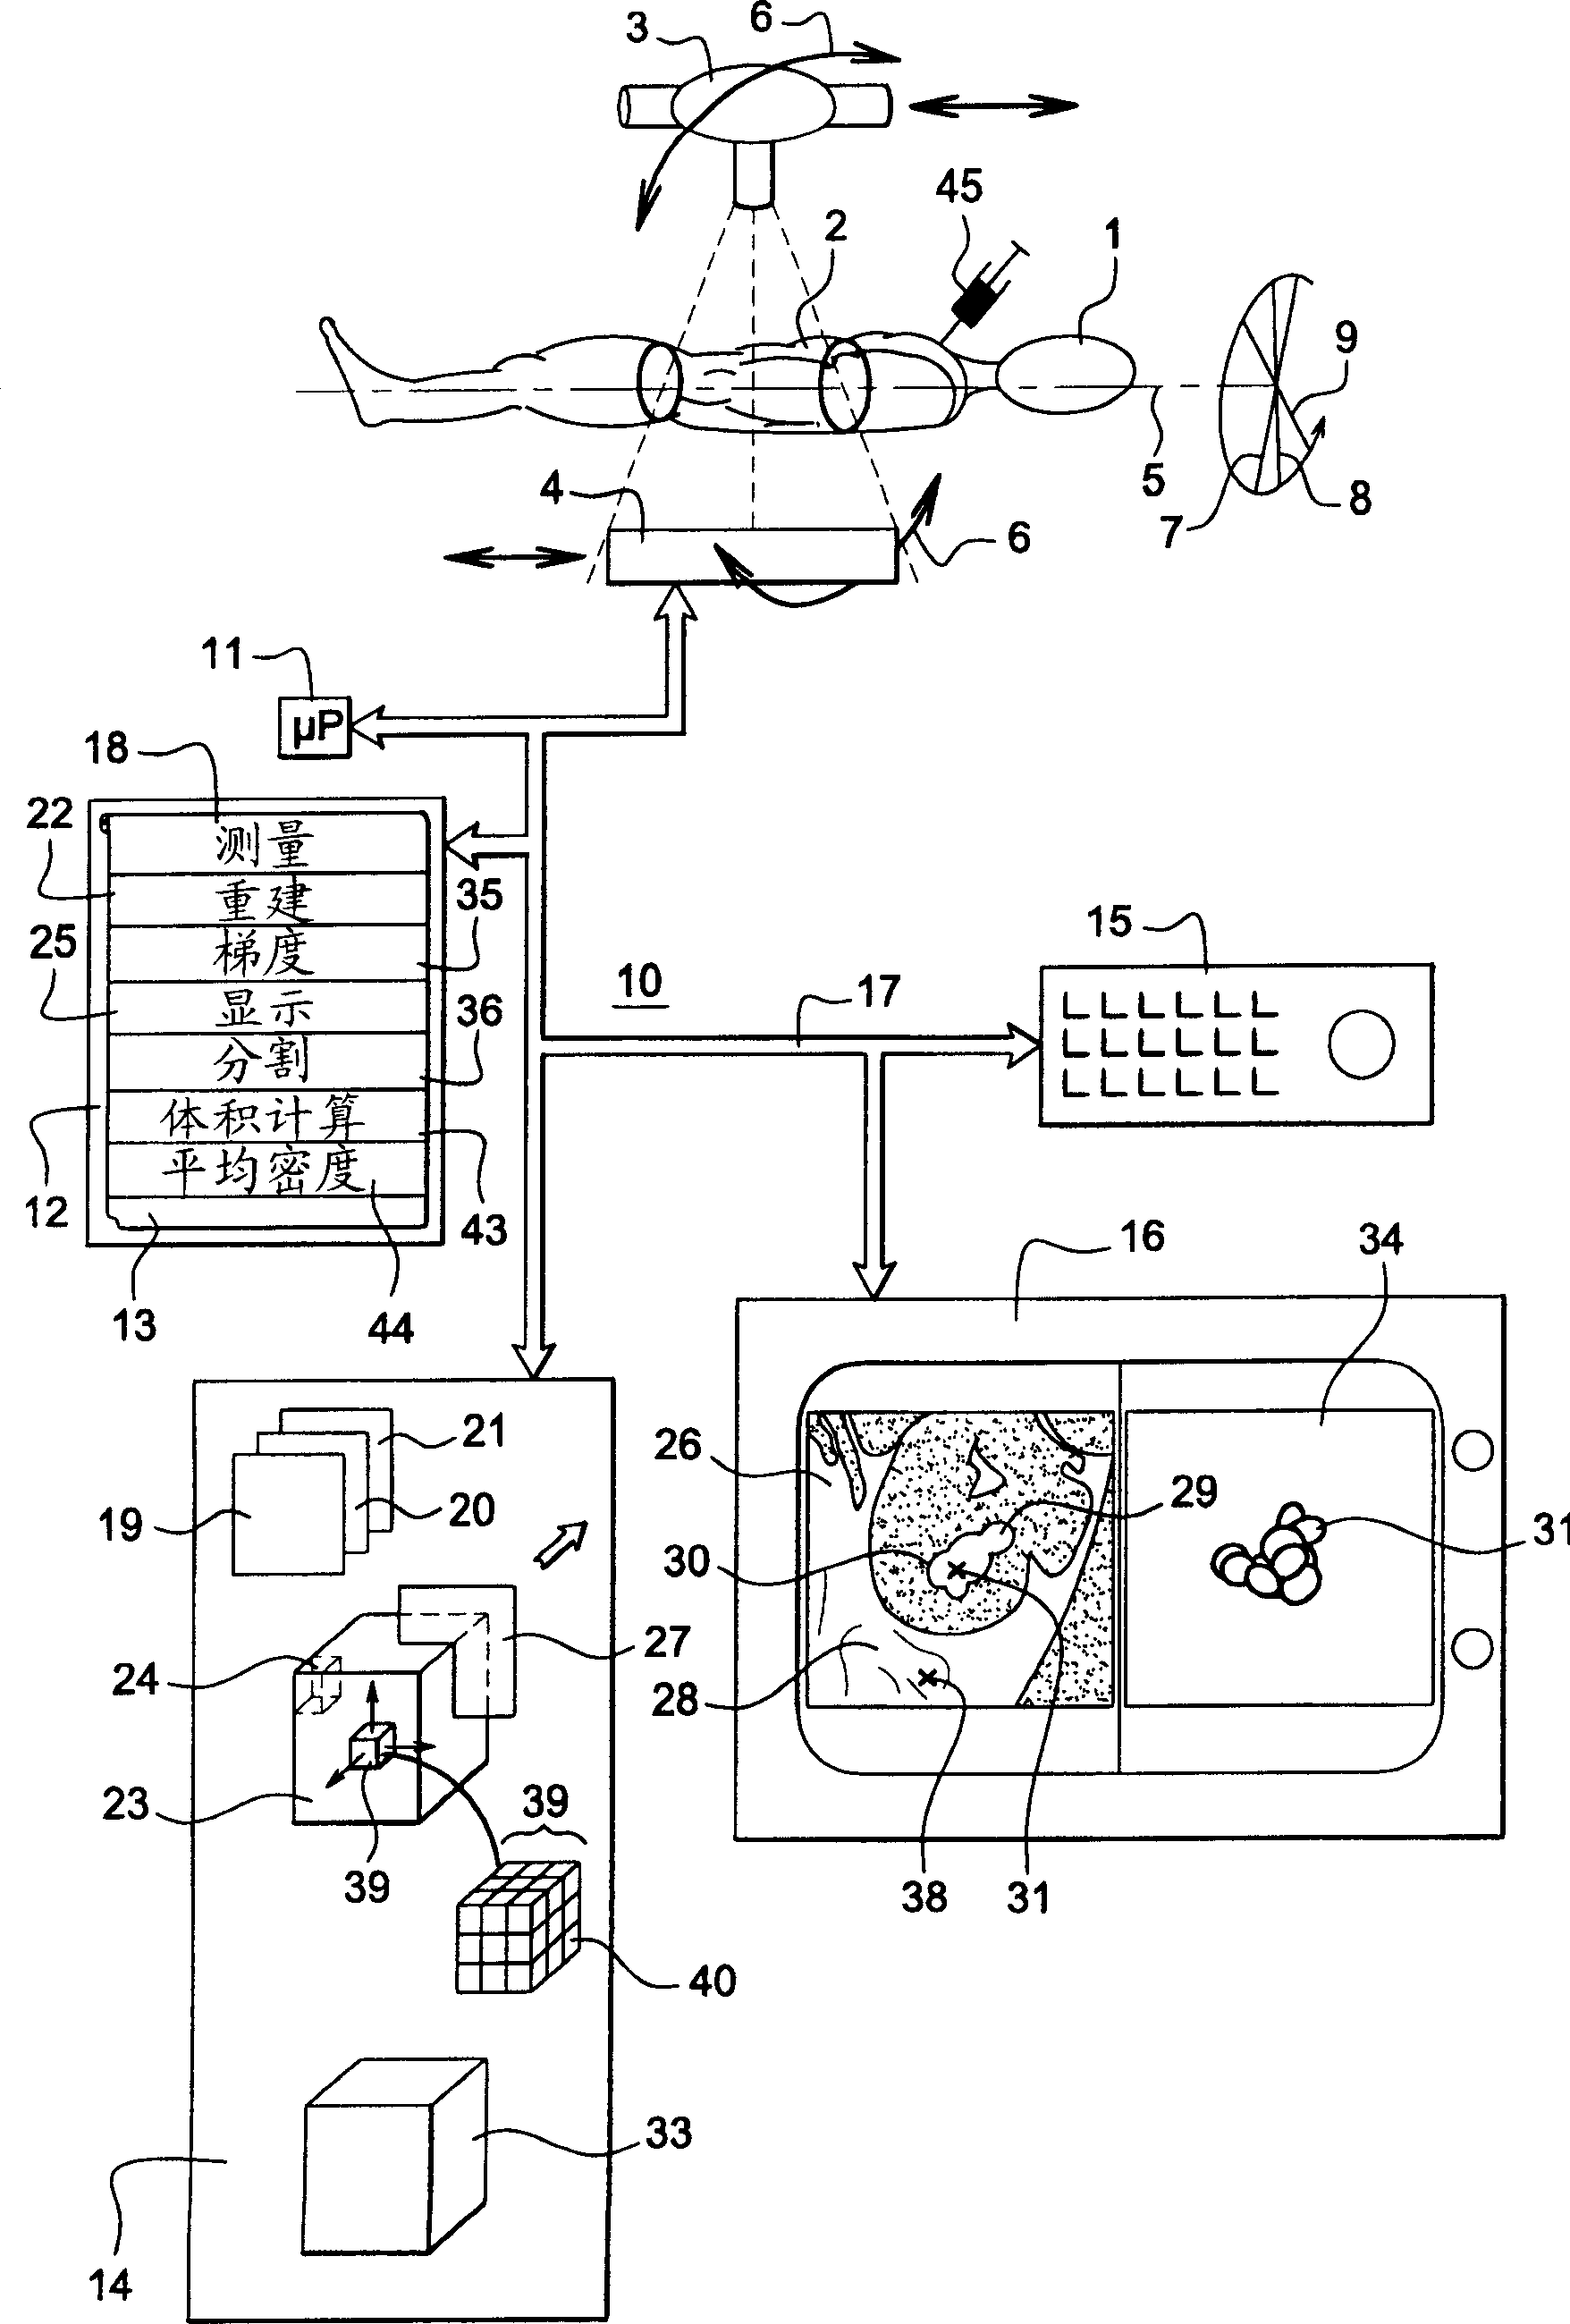 Method and apparatus for the preparation of a renal image